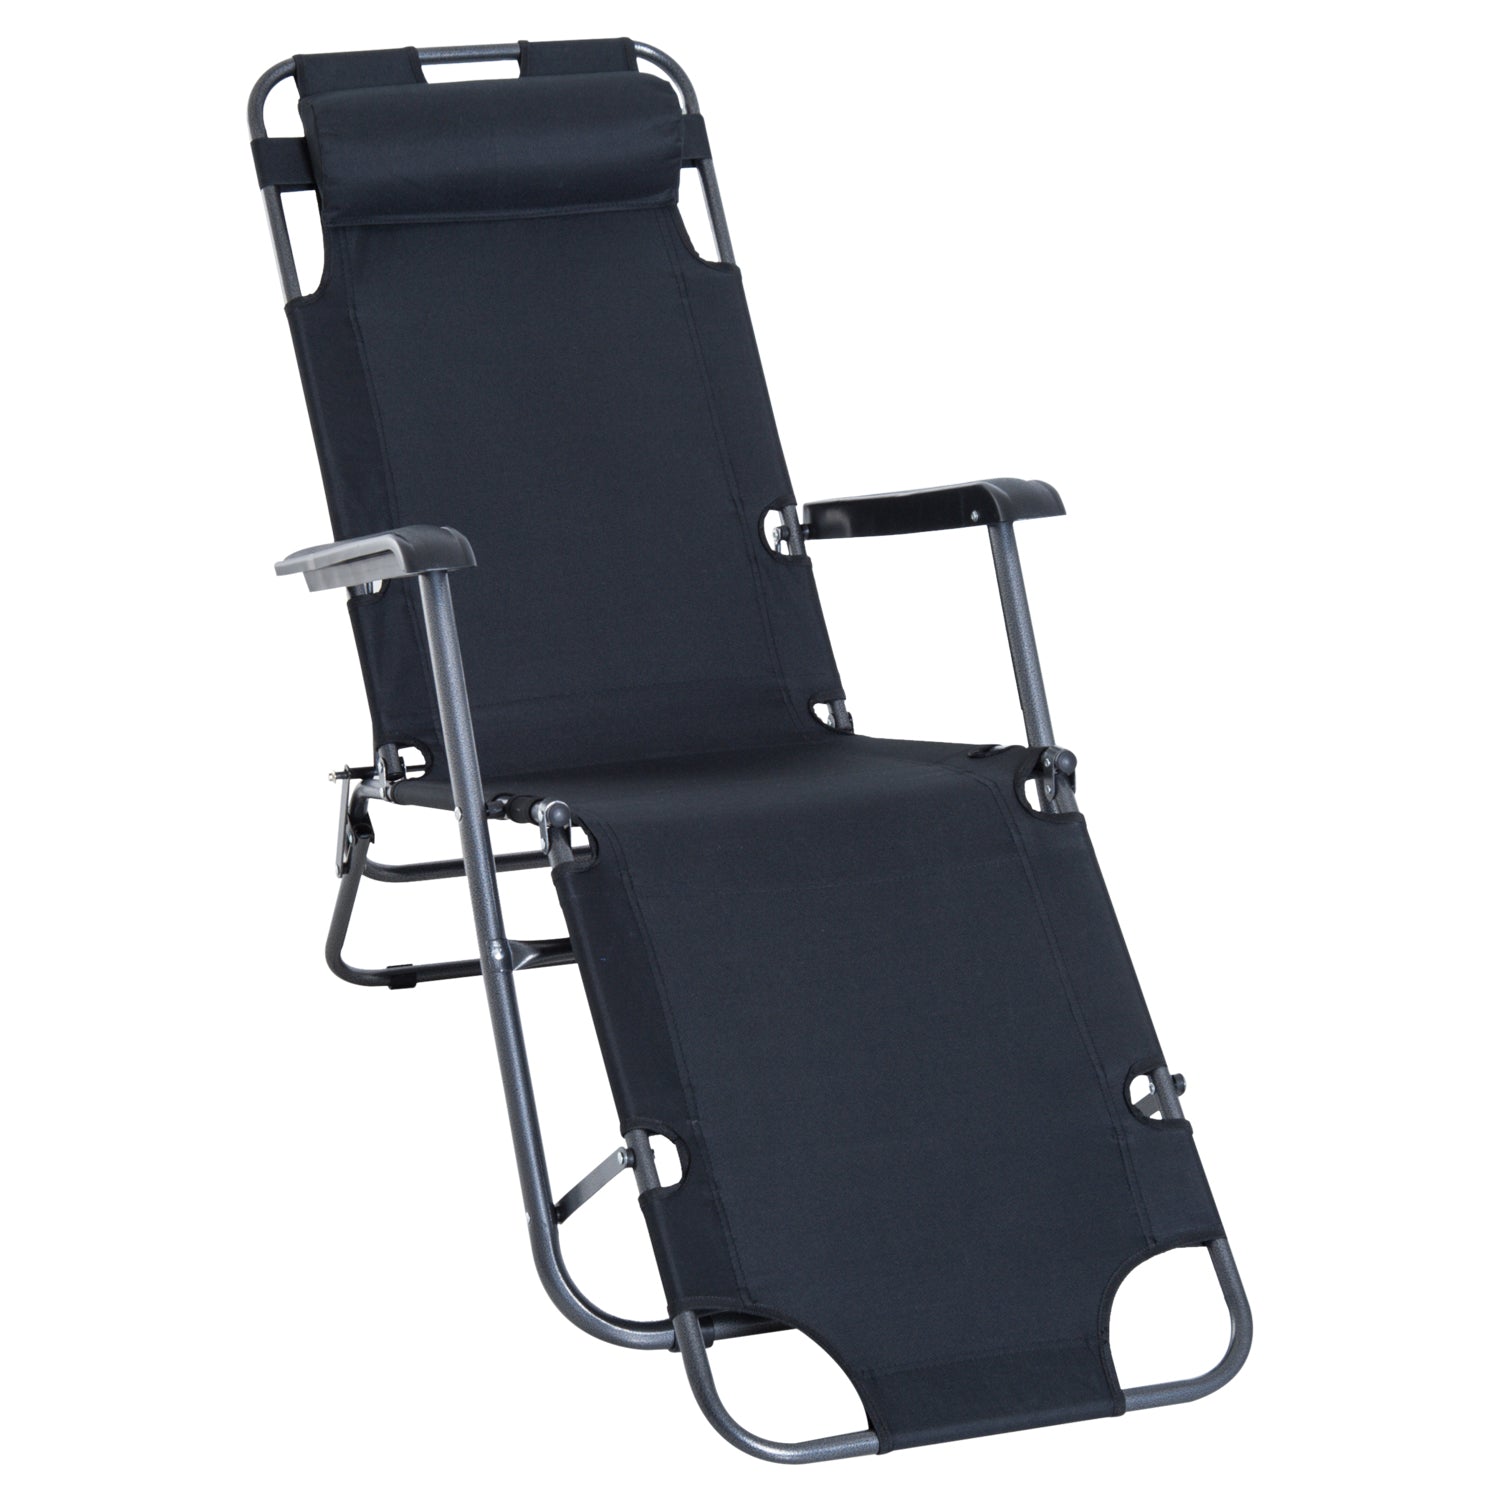 Outsunny 2 in 1 Outdoor Folding Sun Lounger w/ Adjustable Back and Pillow Black  | TJ Hughes